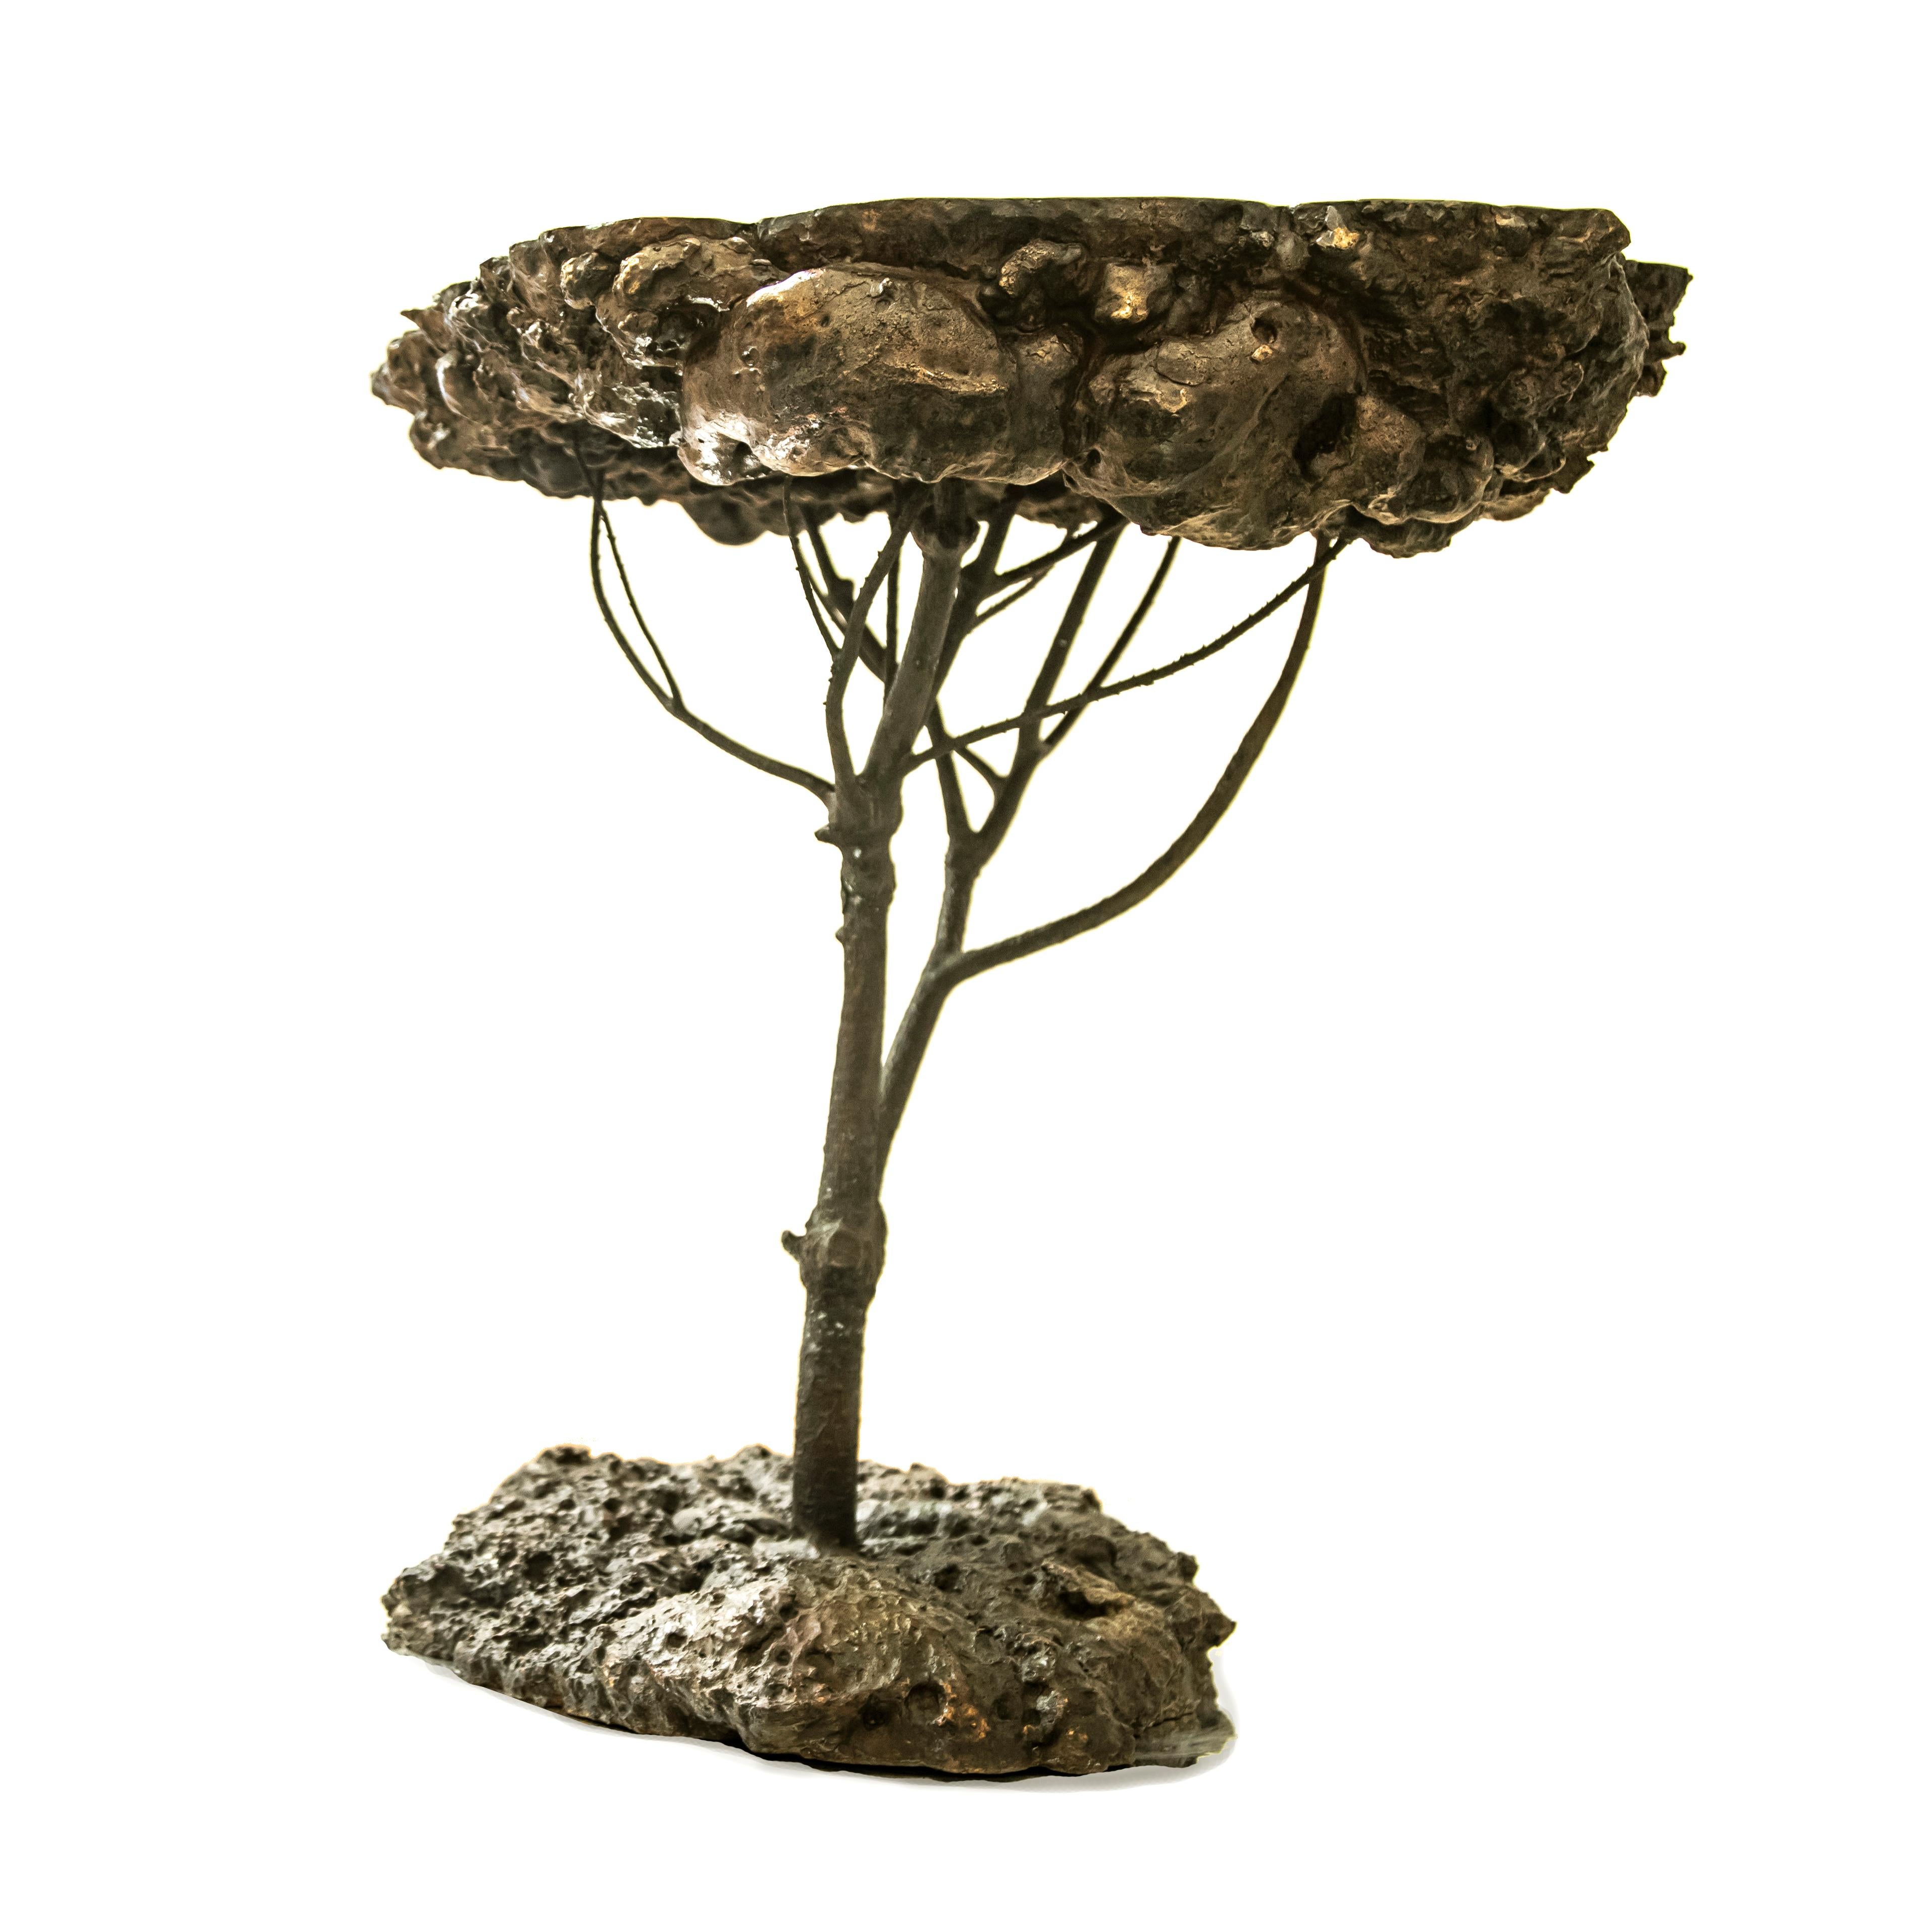 A cast bronze side table inspired by the Roman pine trees. Signed Limited Edition of 12.
There is currently 1 item in stock.